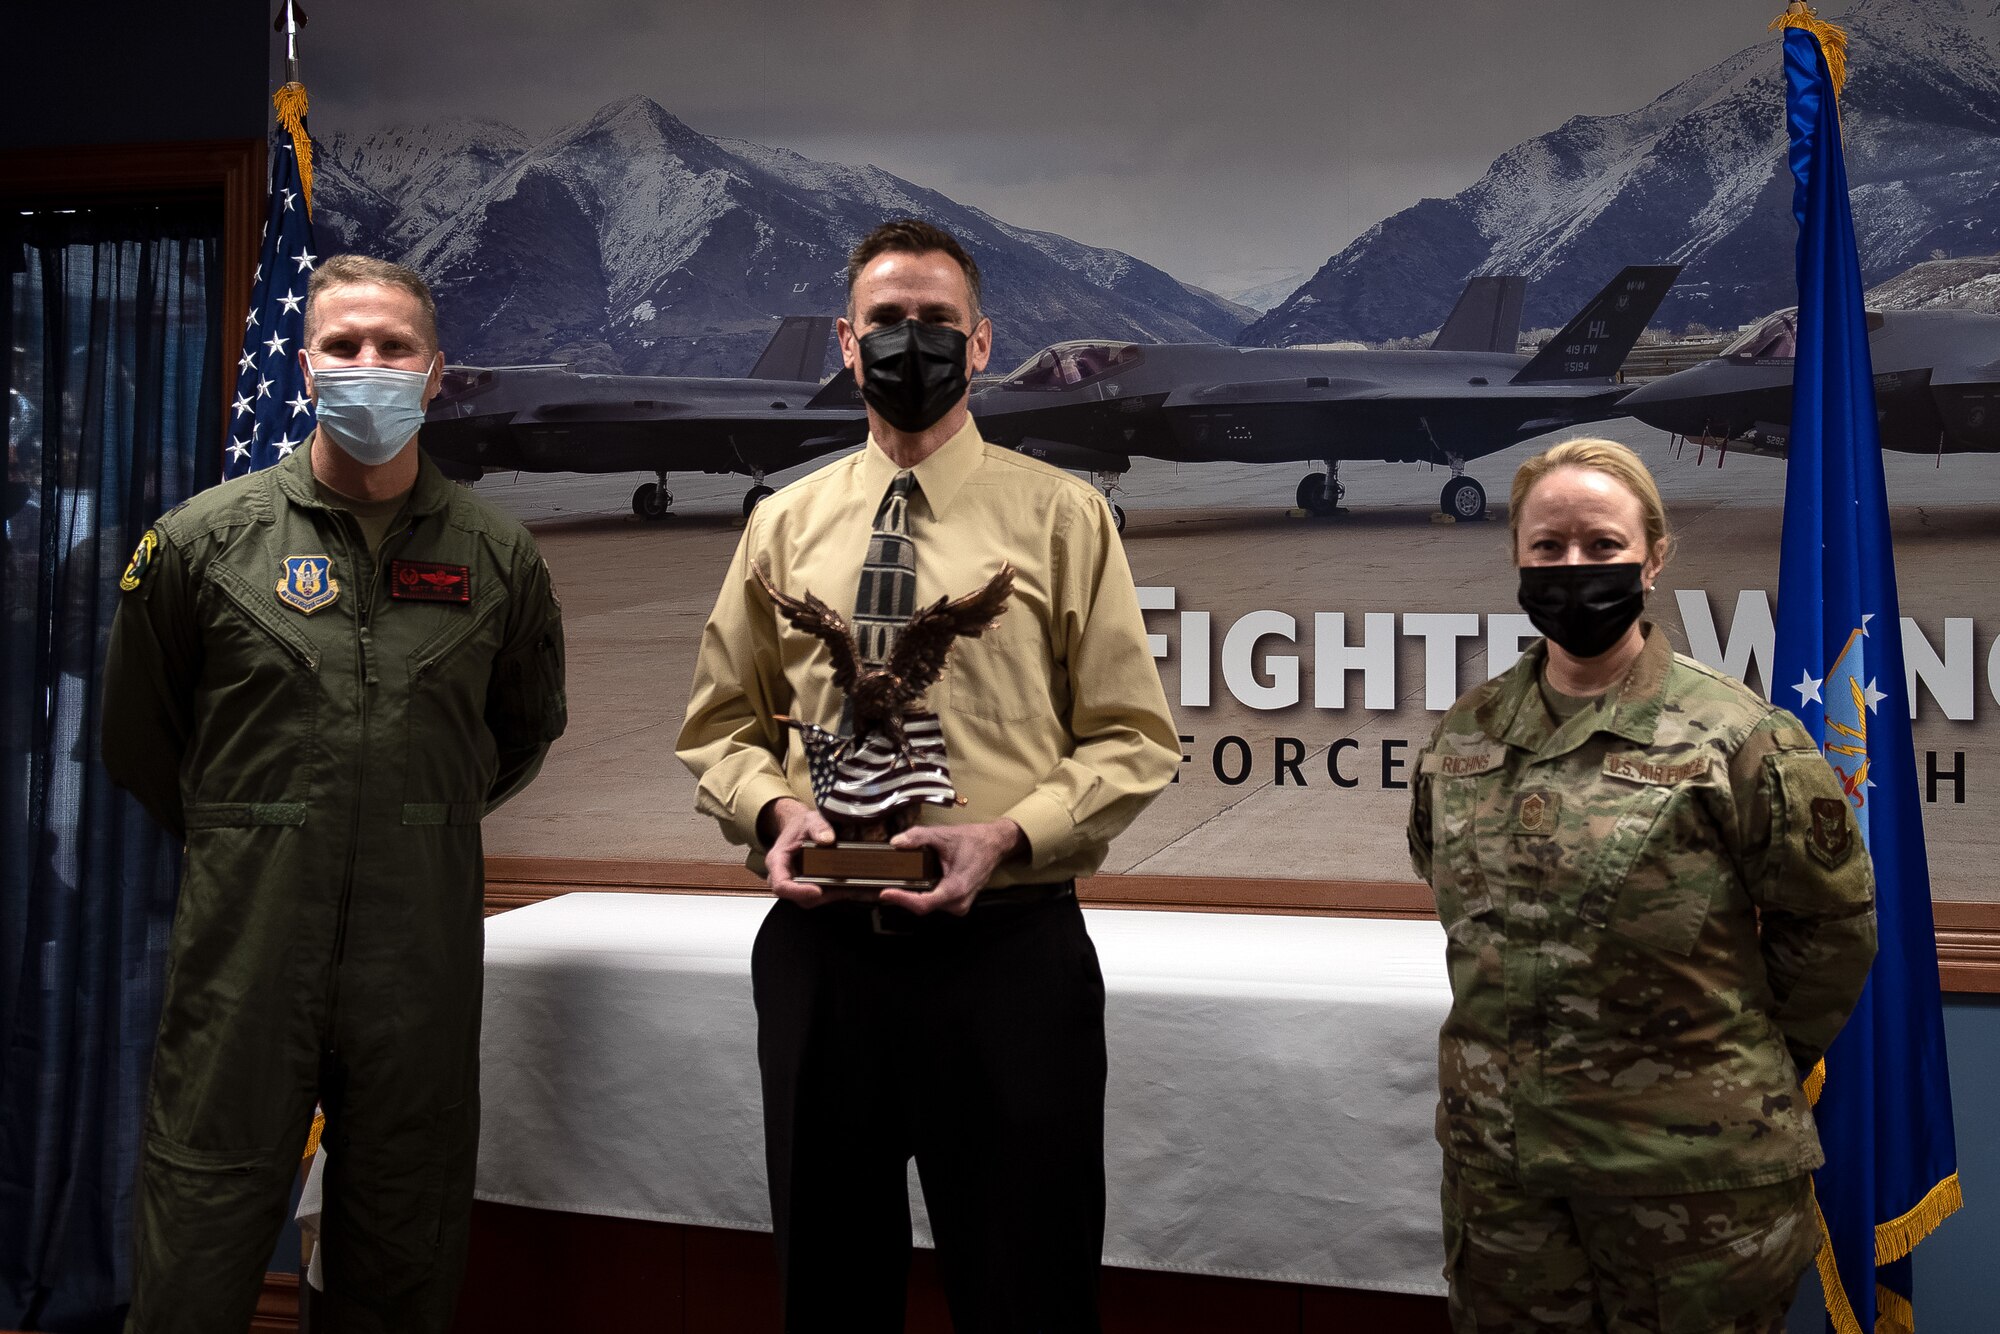 Col. Matthew Fritz, 419th Fighter Wing commander, and Chief Master Sgt. Heather Richins, 419th FW command chief, present the wing’s Employer of the Year award to Pastor Roy Gruber from Washington Heights Church during a ceremony Feb. 6, 2022 at Hill Air Force Base, Utah.